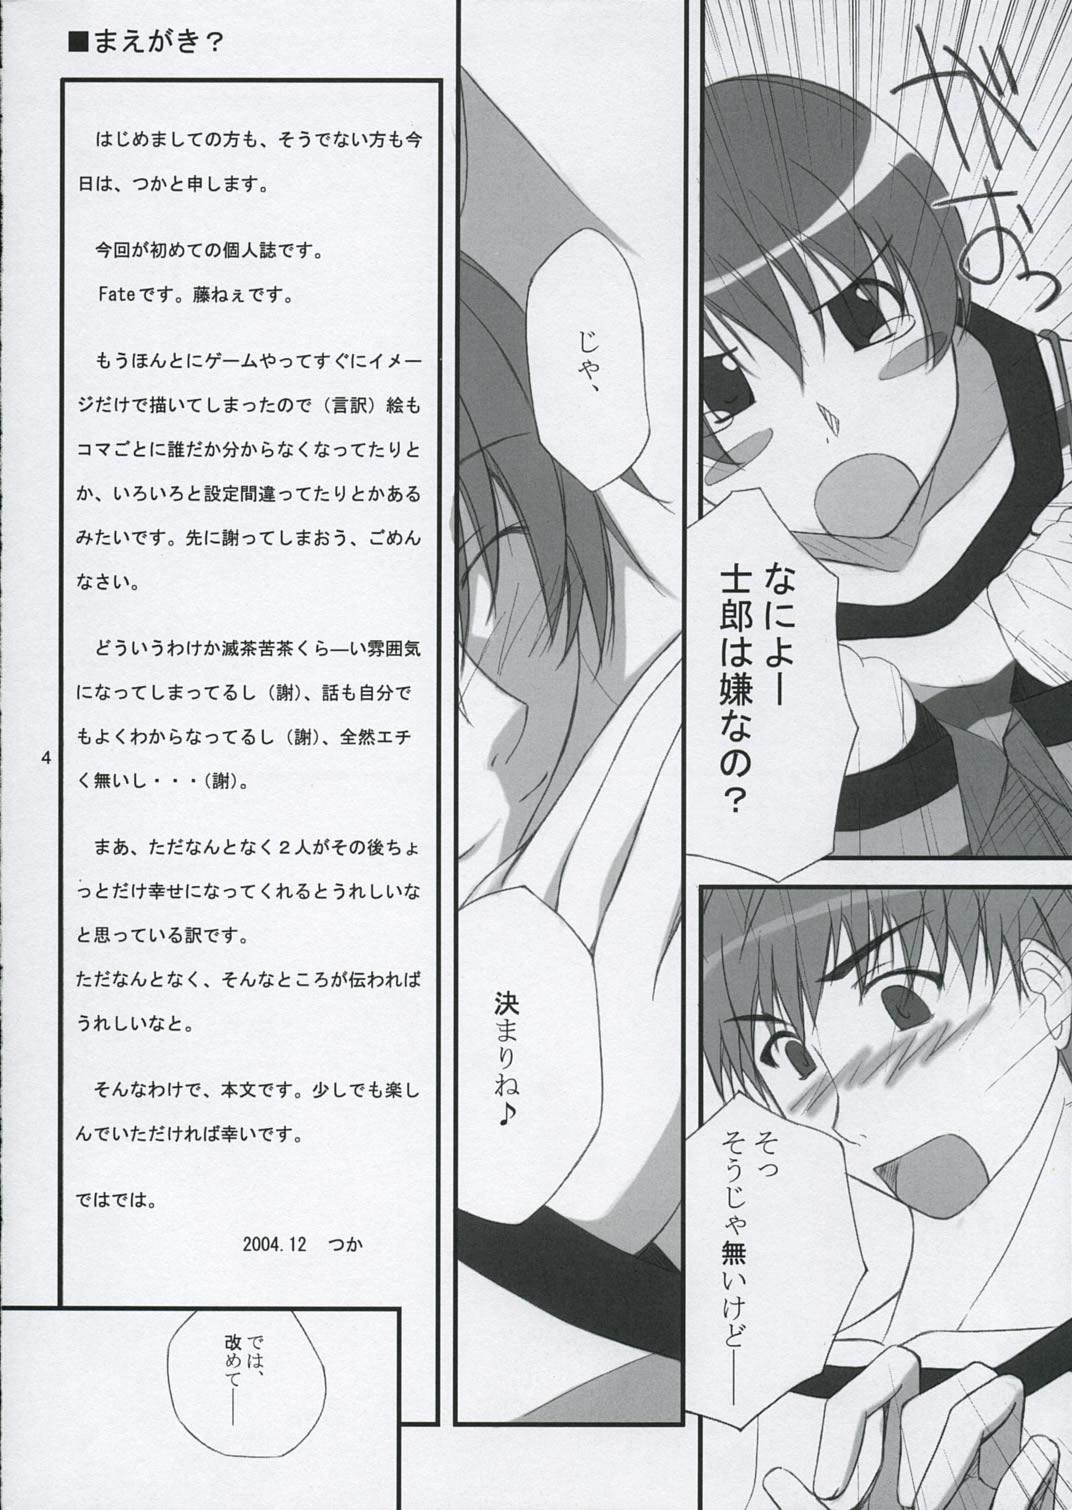 Interracial Sex The Place To Be? - Fate stay night Infiel - Page 3